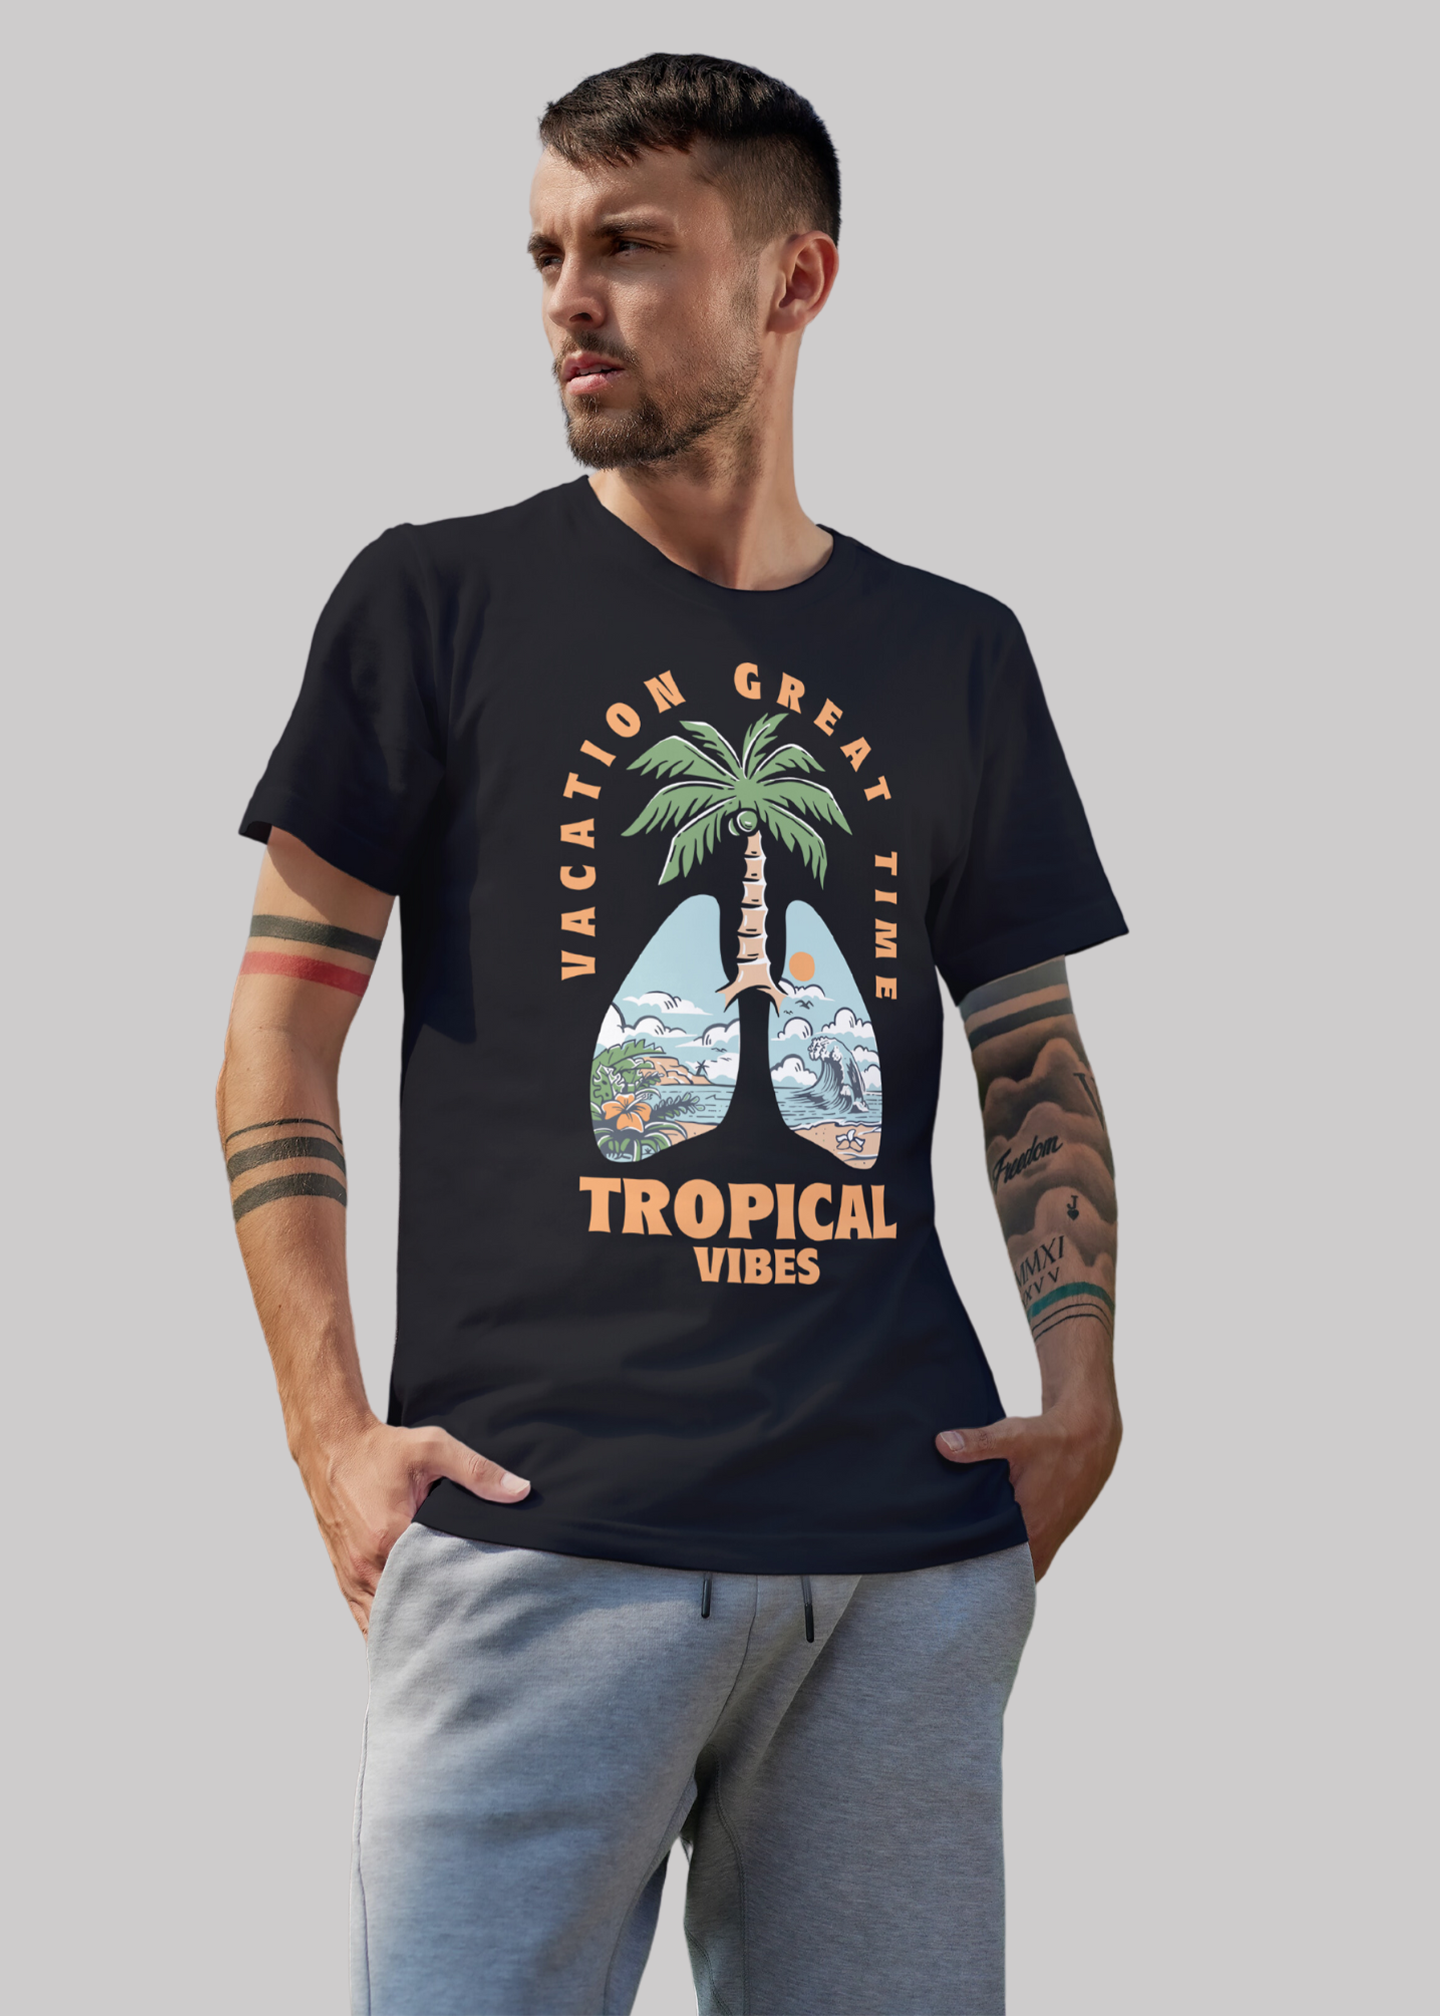 Vacation great times Printed Half Sleeve Premium Cotton T-shirt For Men